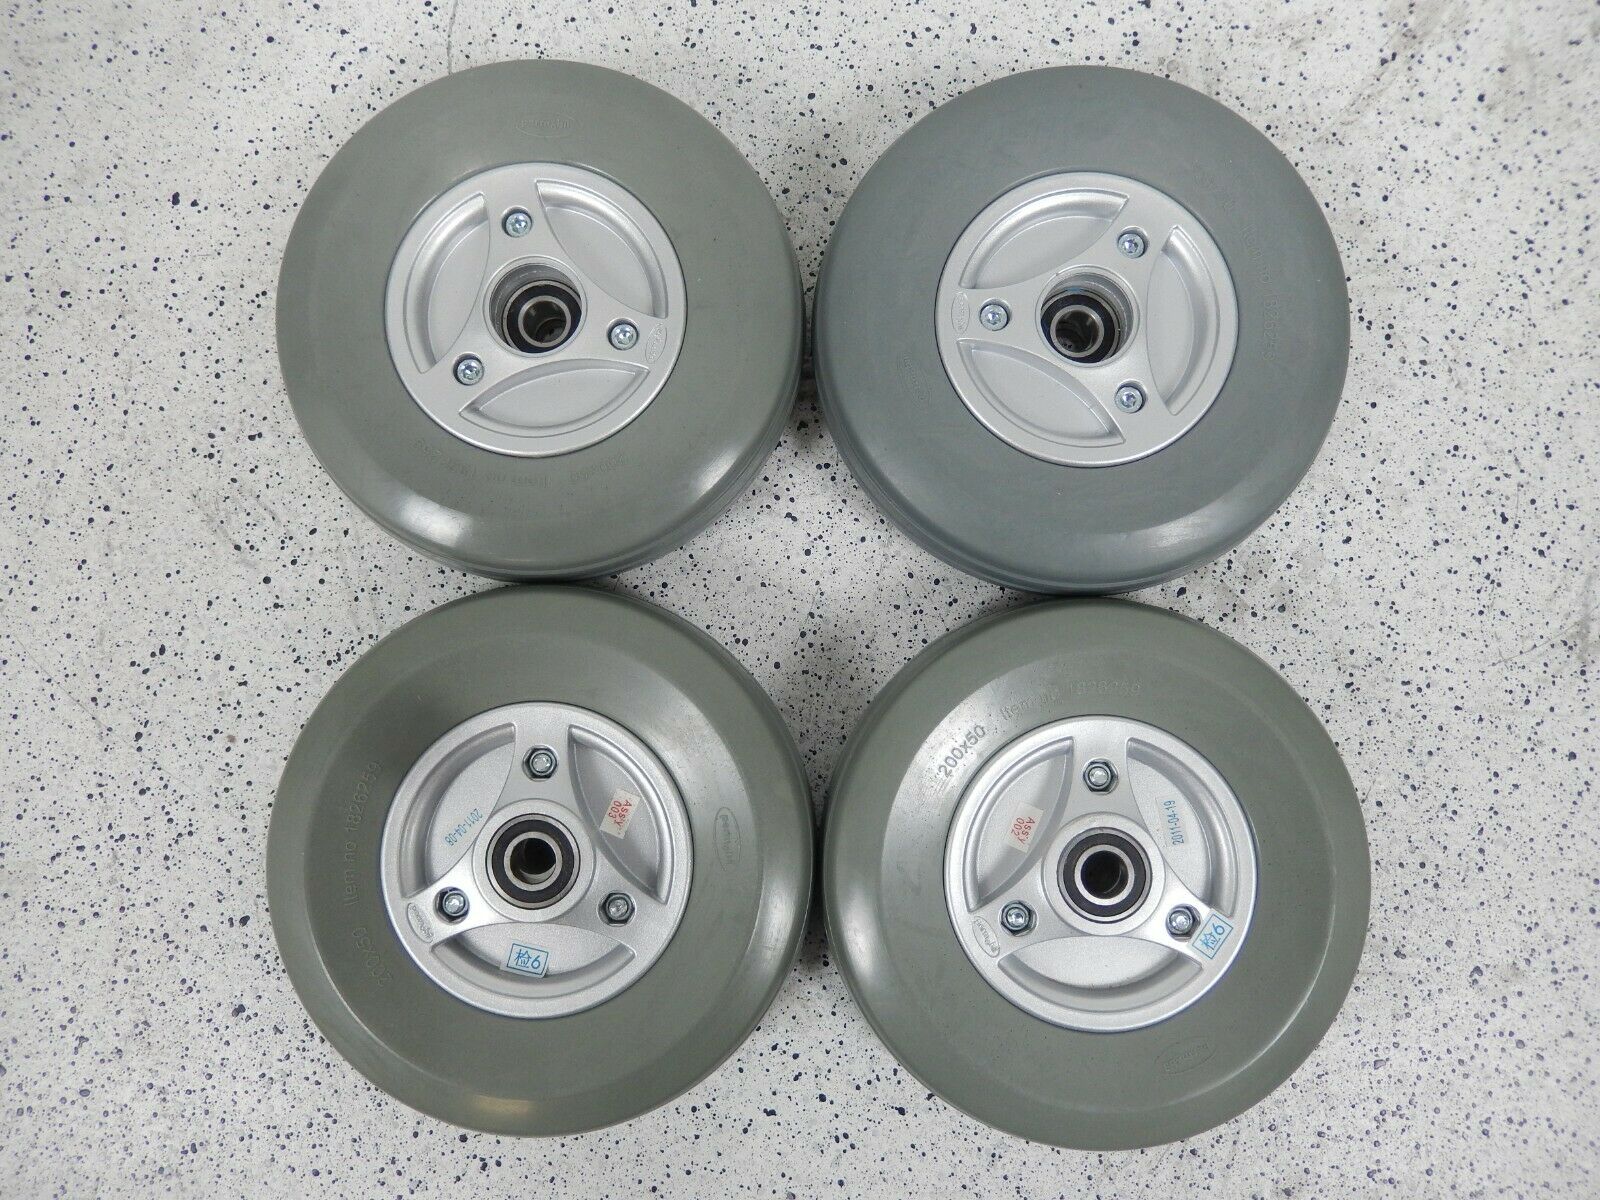 4 Permobil M300 Caster Wheels W/ Rim And Bearing